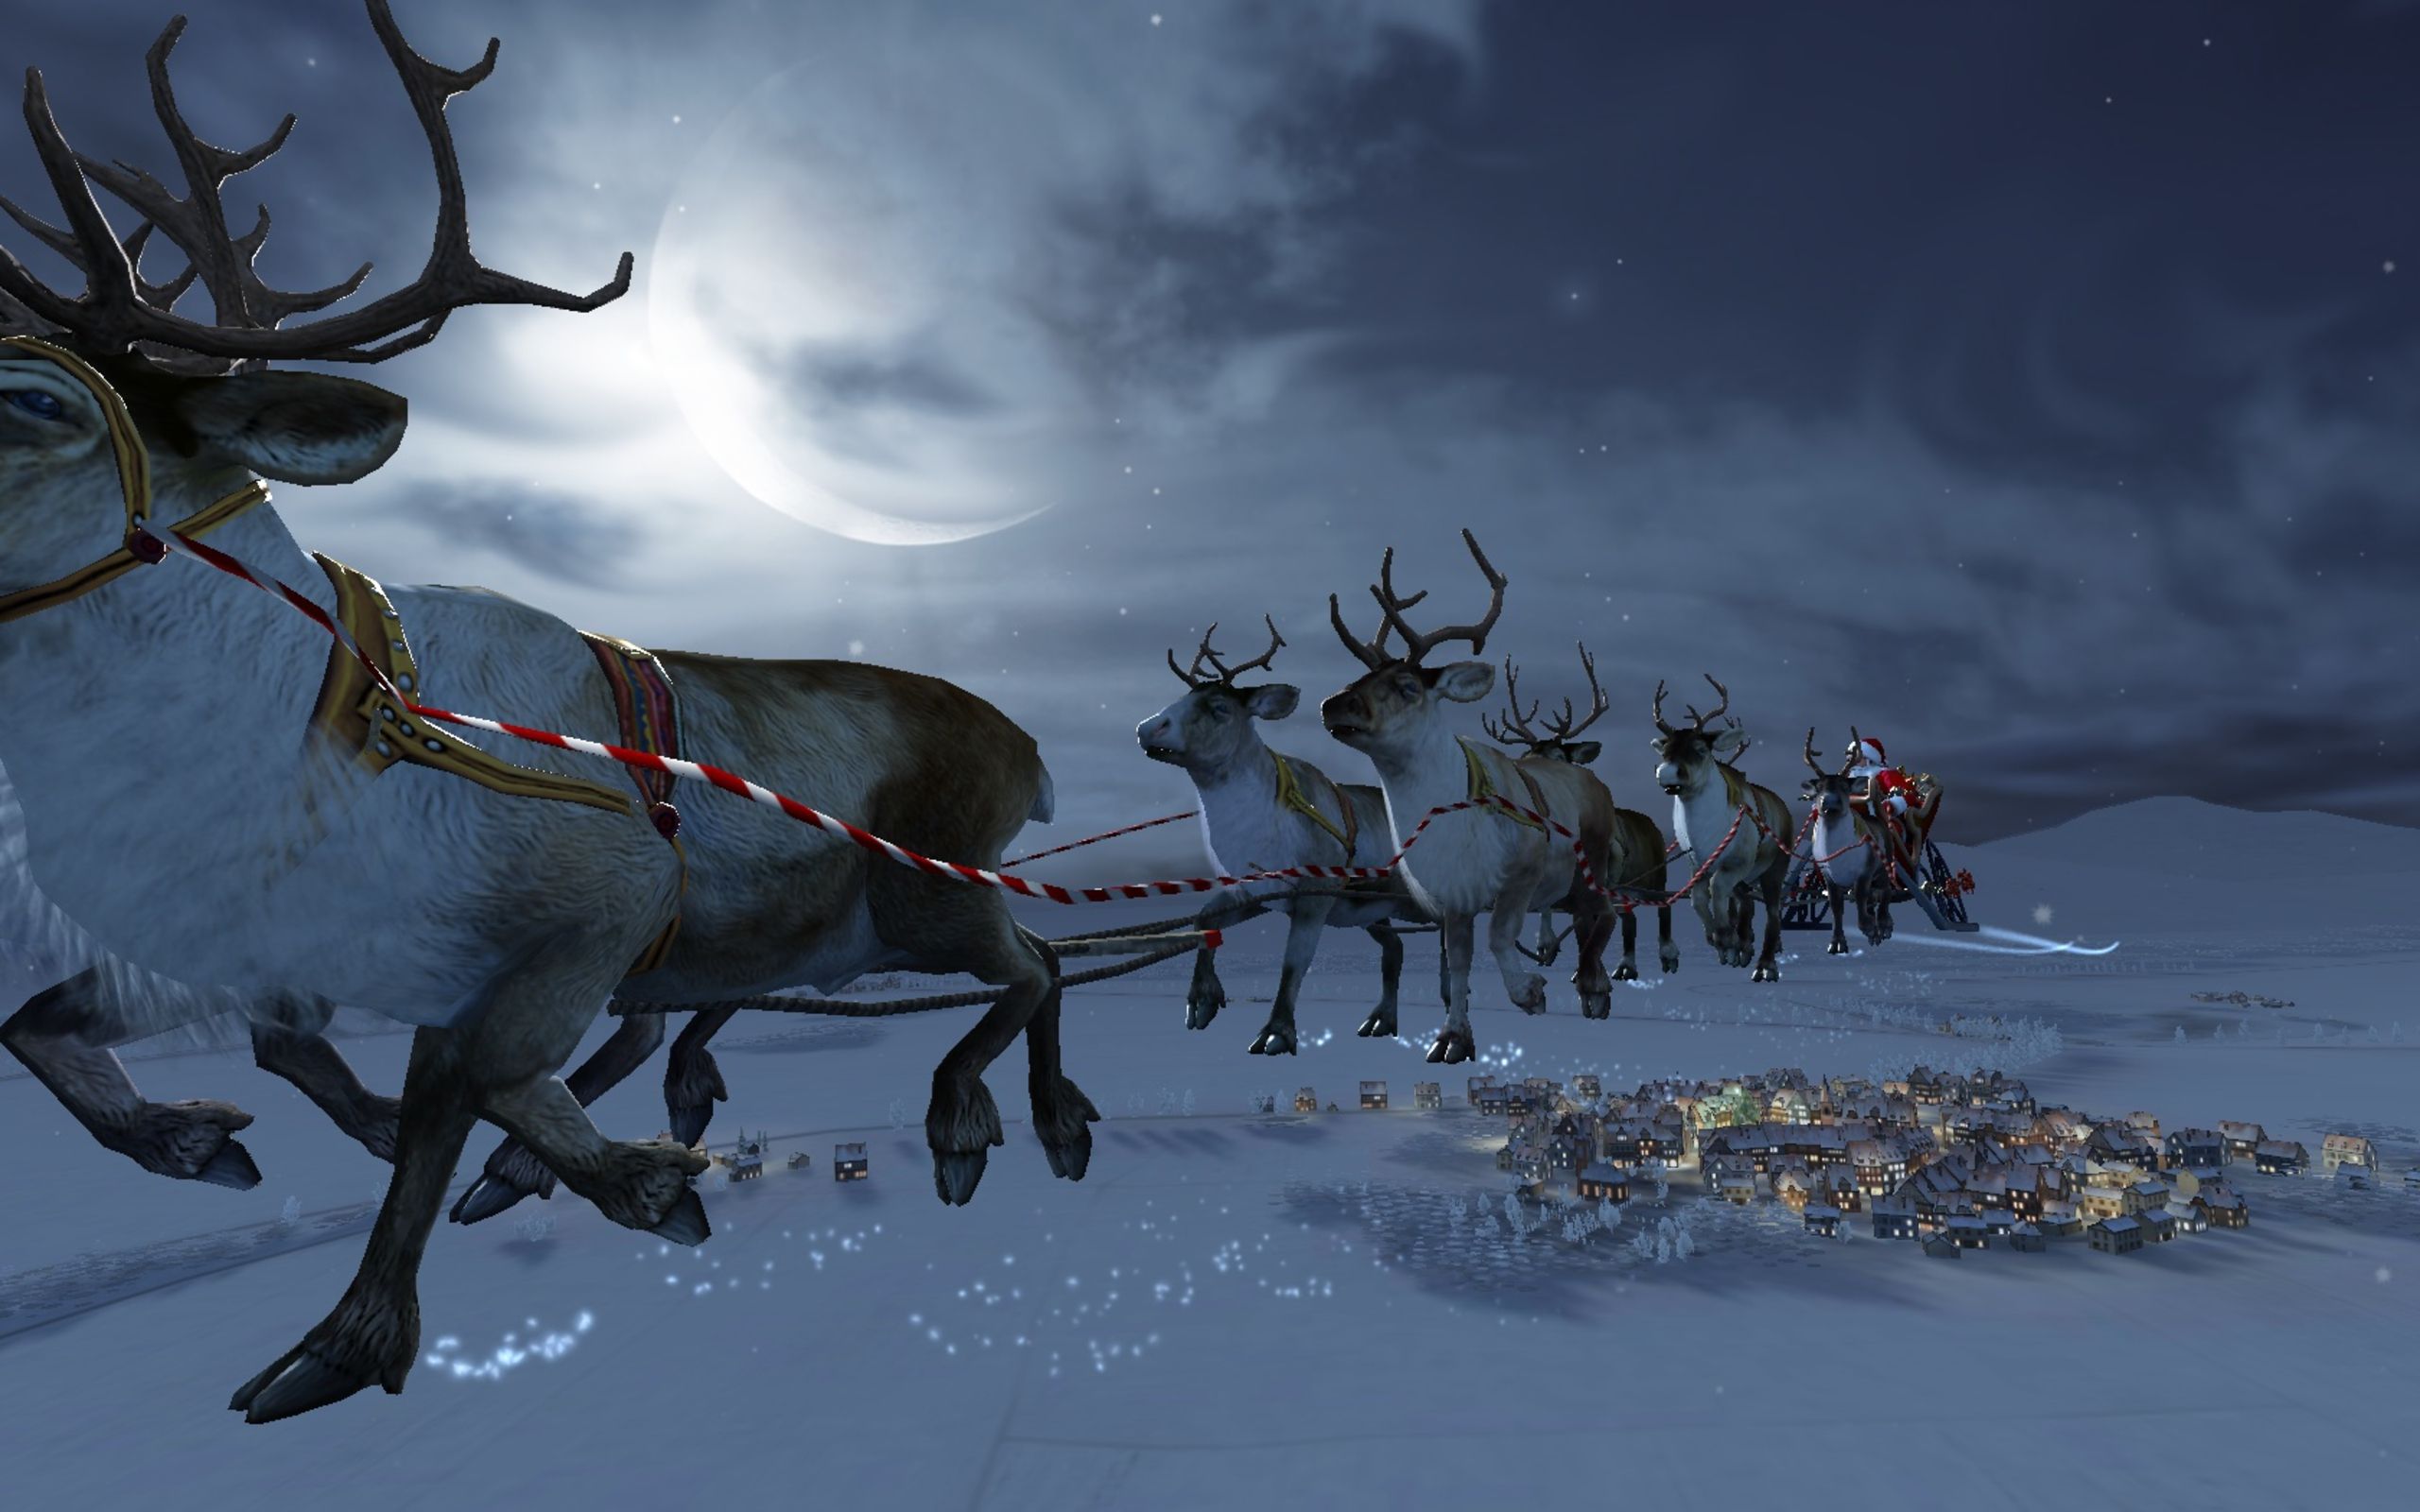 Download wallpaper winter, snow, magic, the moon, stars, a month, Christmas, houses, moon, Santa Claus, deer, Christmas, snow, stars, Santa Claus, Rudolf, section new year / christmas in resolution 2560x1600